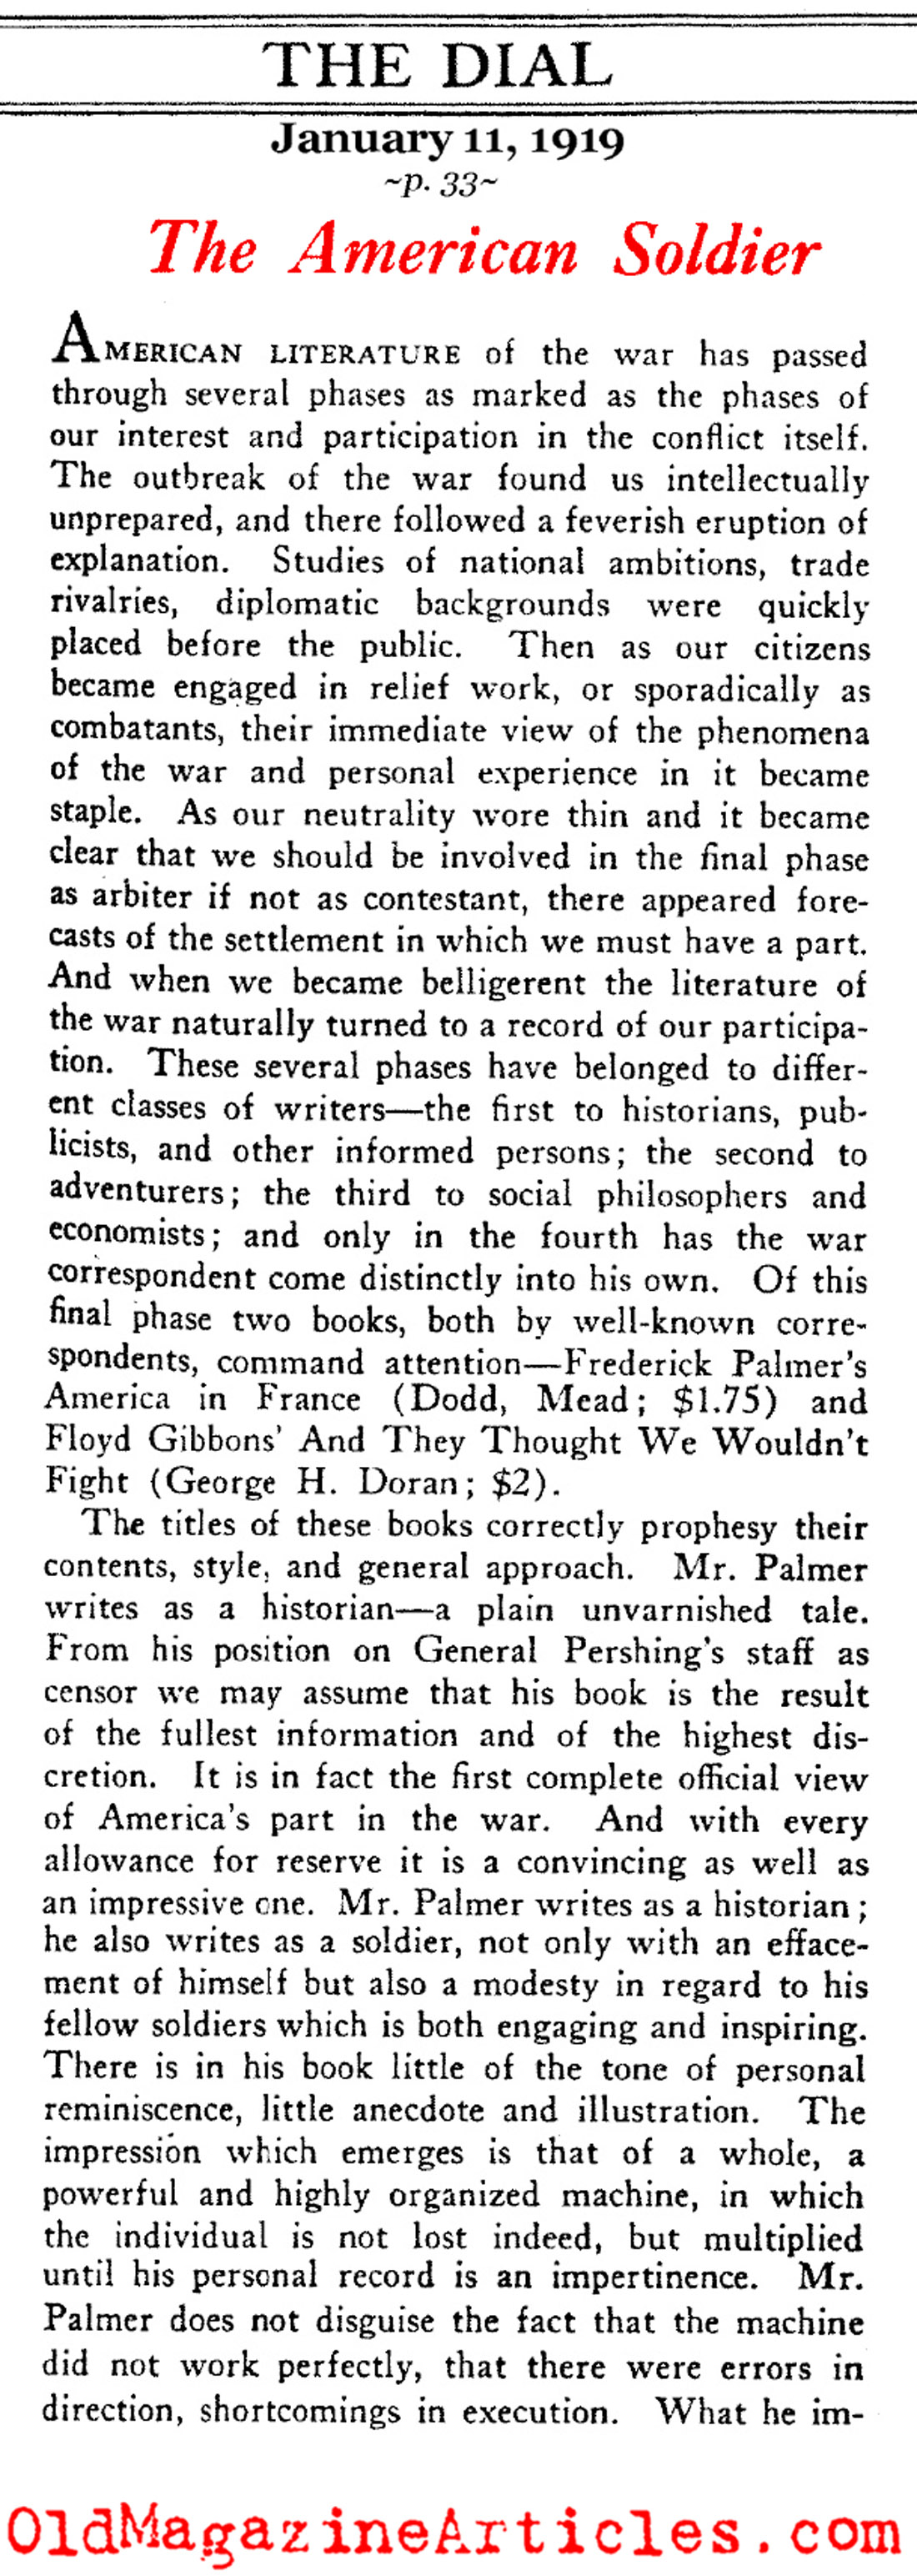 A Review of Two W.W. I Books (The Dial Magazine, 1919)